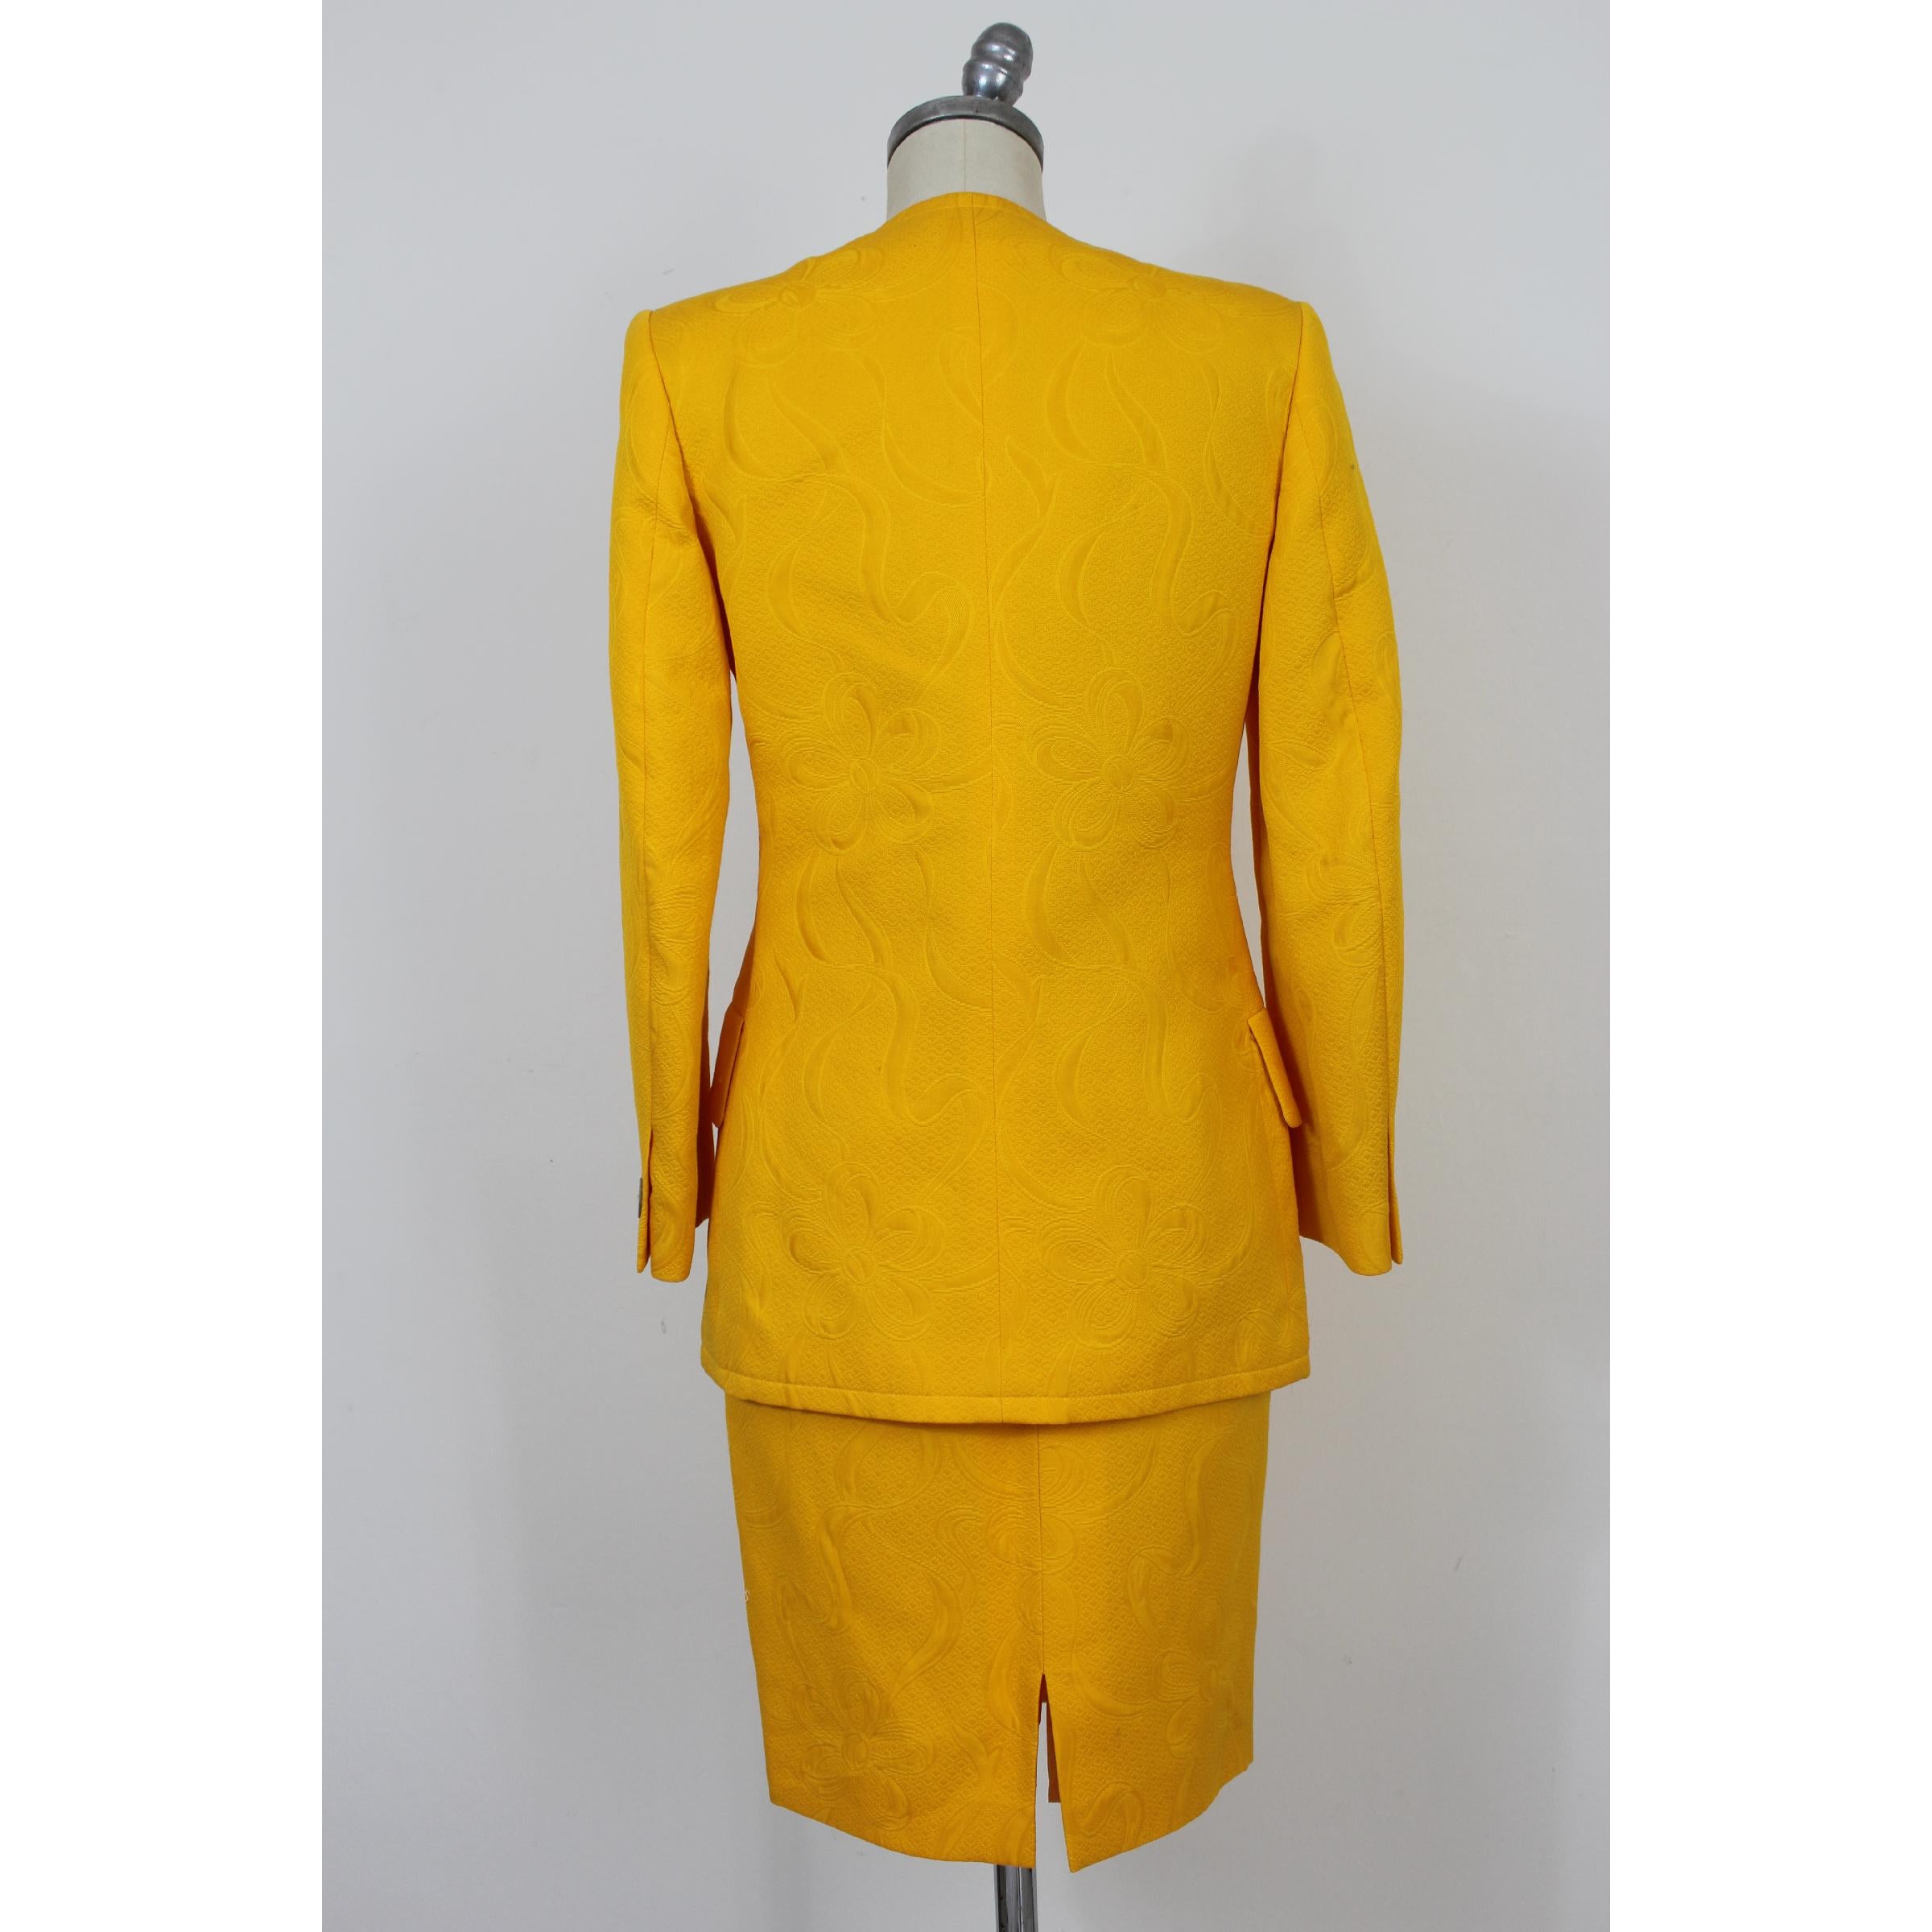 Vintage 70s skirt suit dress. Jacket and skirt, 100% cotton, yellow with damask type floral designs. Made in Italy. New with tag, there are some small spots due to time on the dress.

Size: 42 It 8 Us 10 Uk

Shoulder: 42 cm
Bust/Chest: 47 cm
Sleeve: